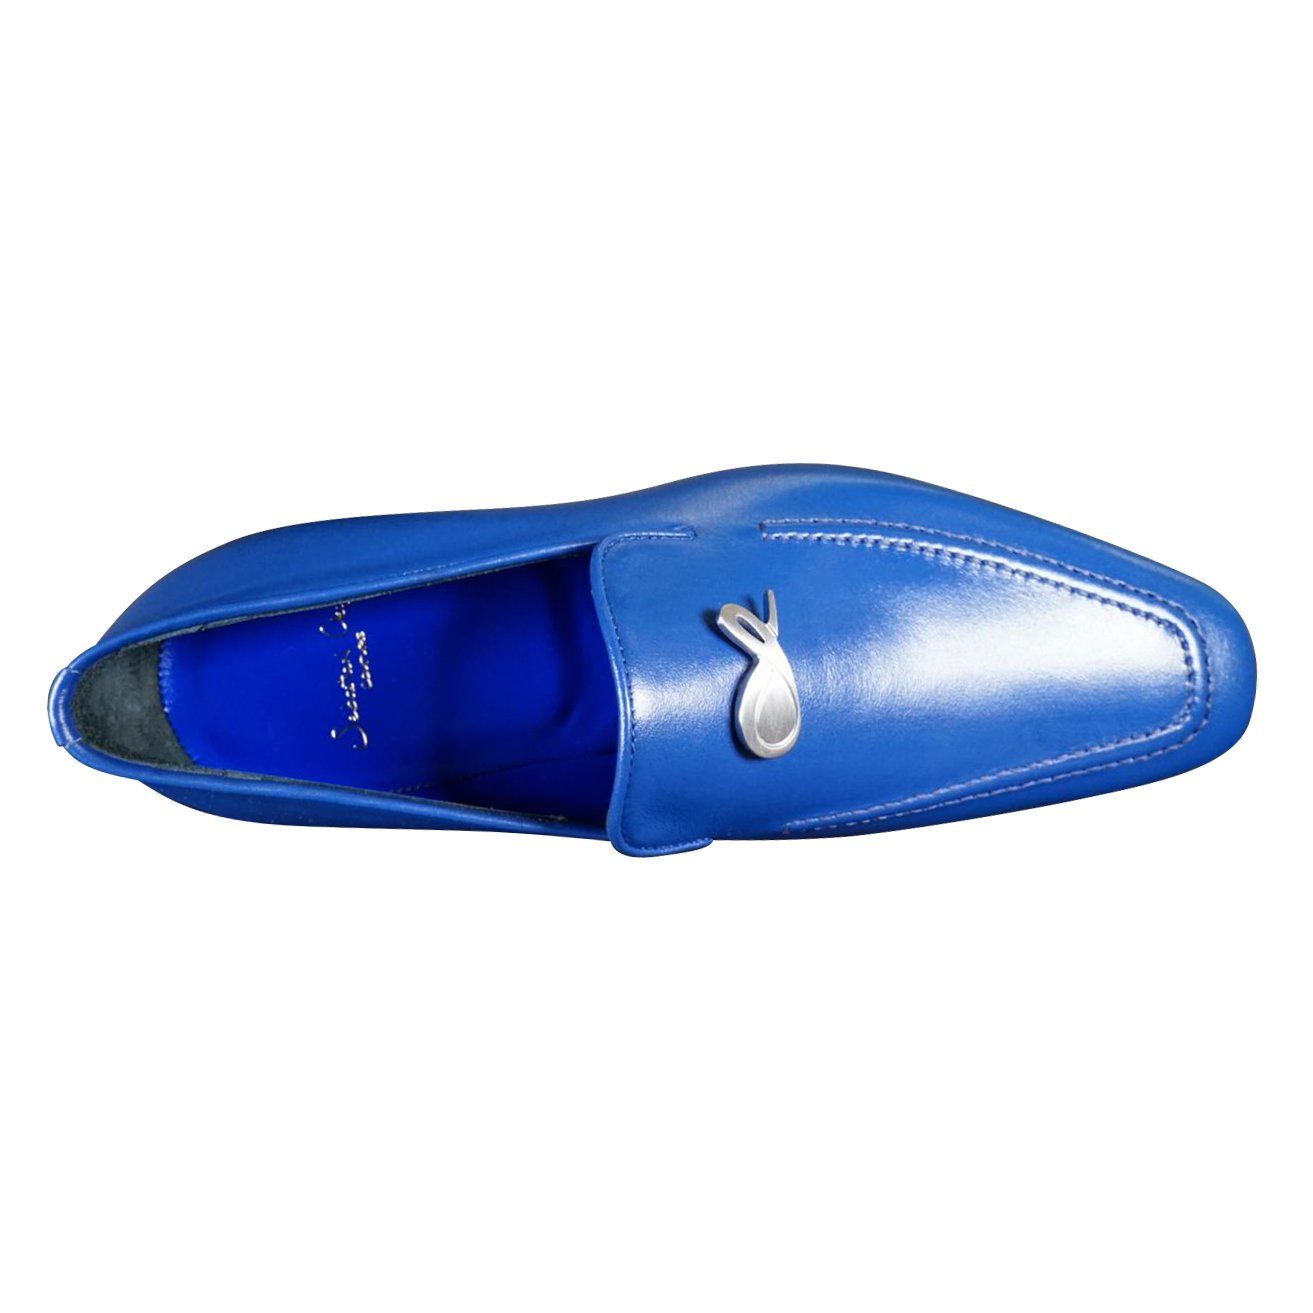 Cobalt With Silver Hardware Leather Loafer